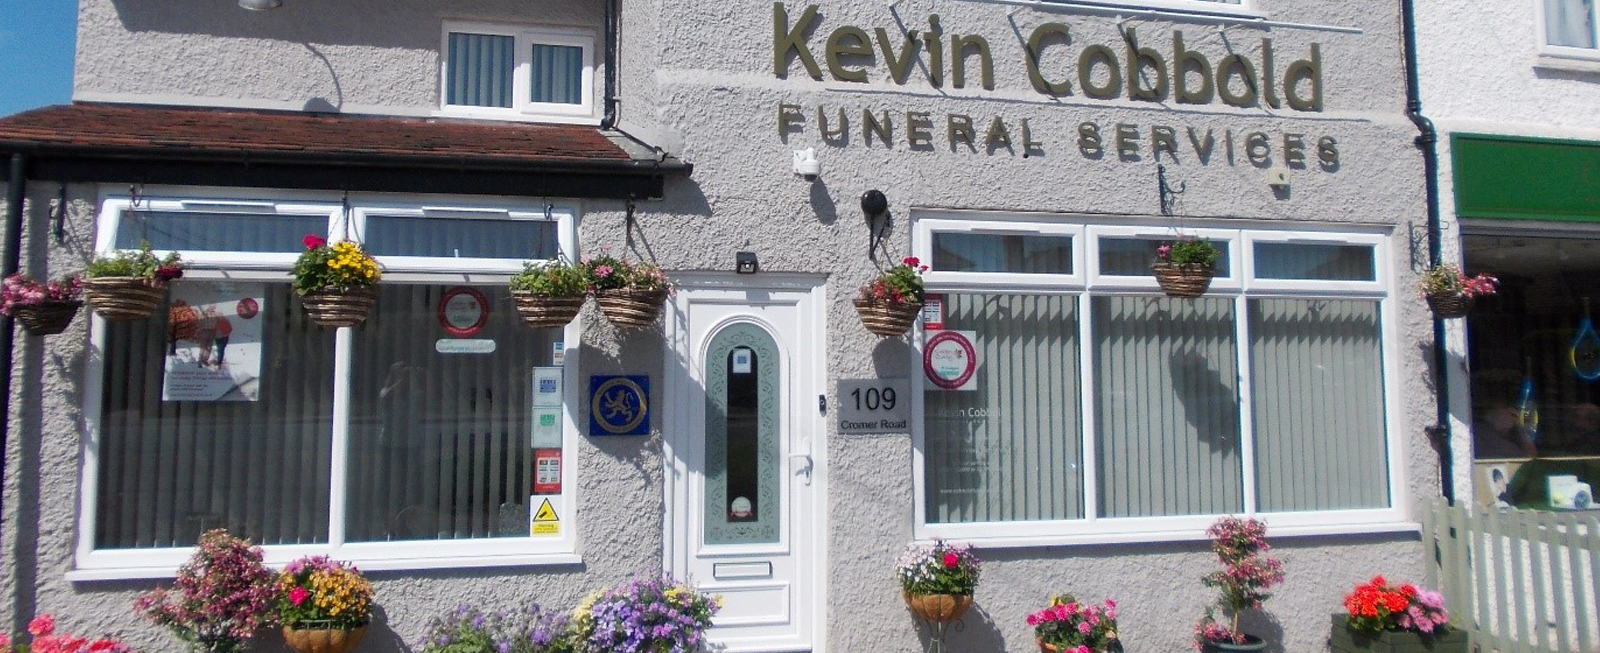 Kevin Cobbold Funeral Services Office in Hellesdon Norwivch